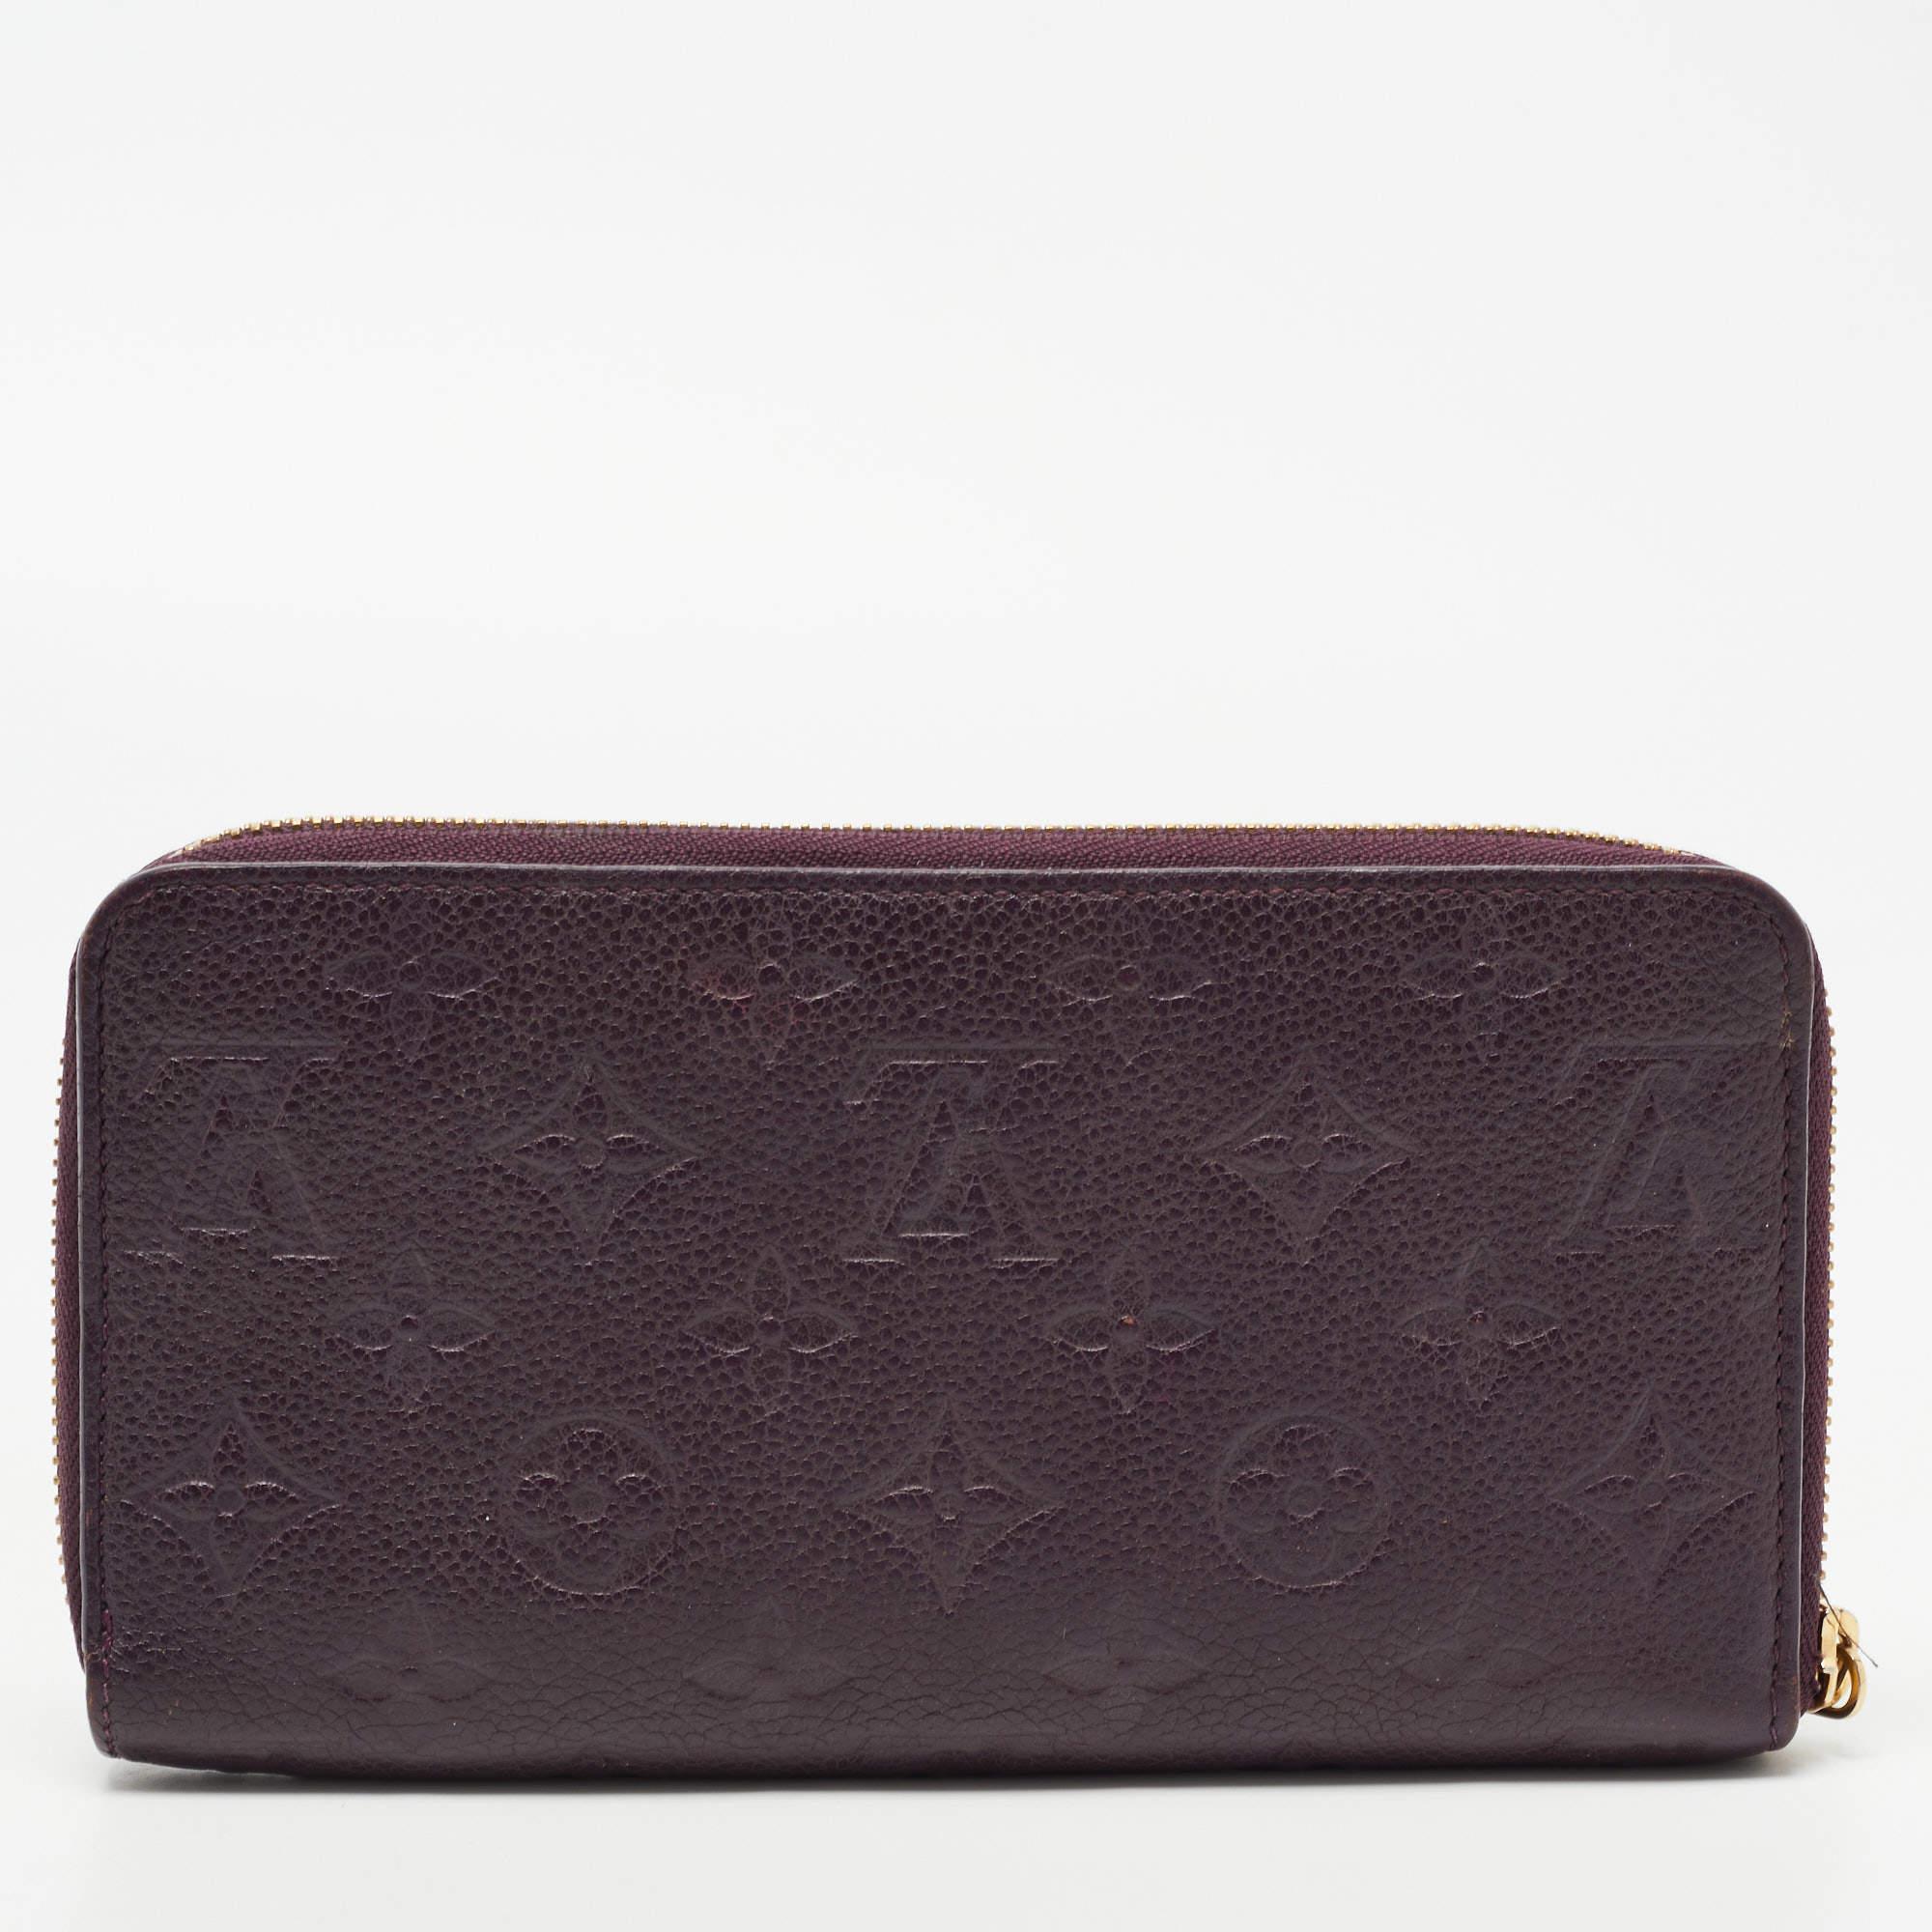 This Louis Vuitton Zippy wallet is conveniently designed for everyday use. Crafted from Monogram Empreinte leather, the wallet has a wide zip closure that opens to reveal multiple slots, lined compartments, and a zip pocket for you to arrange your